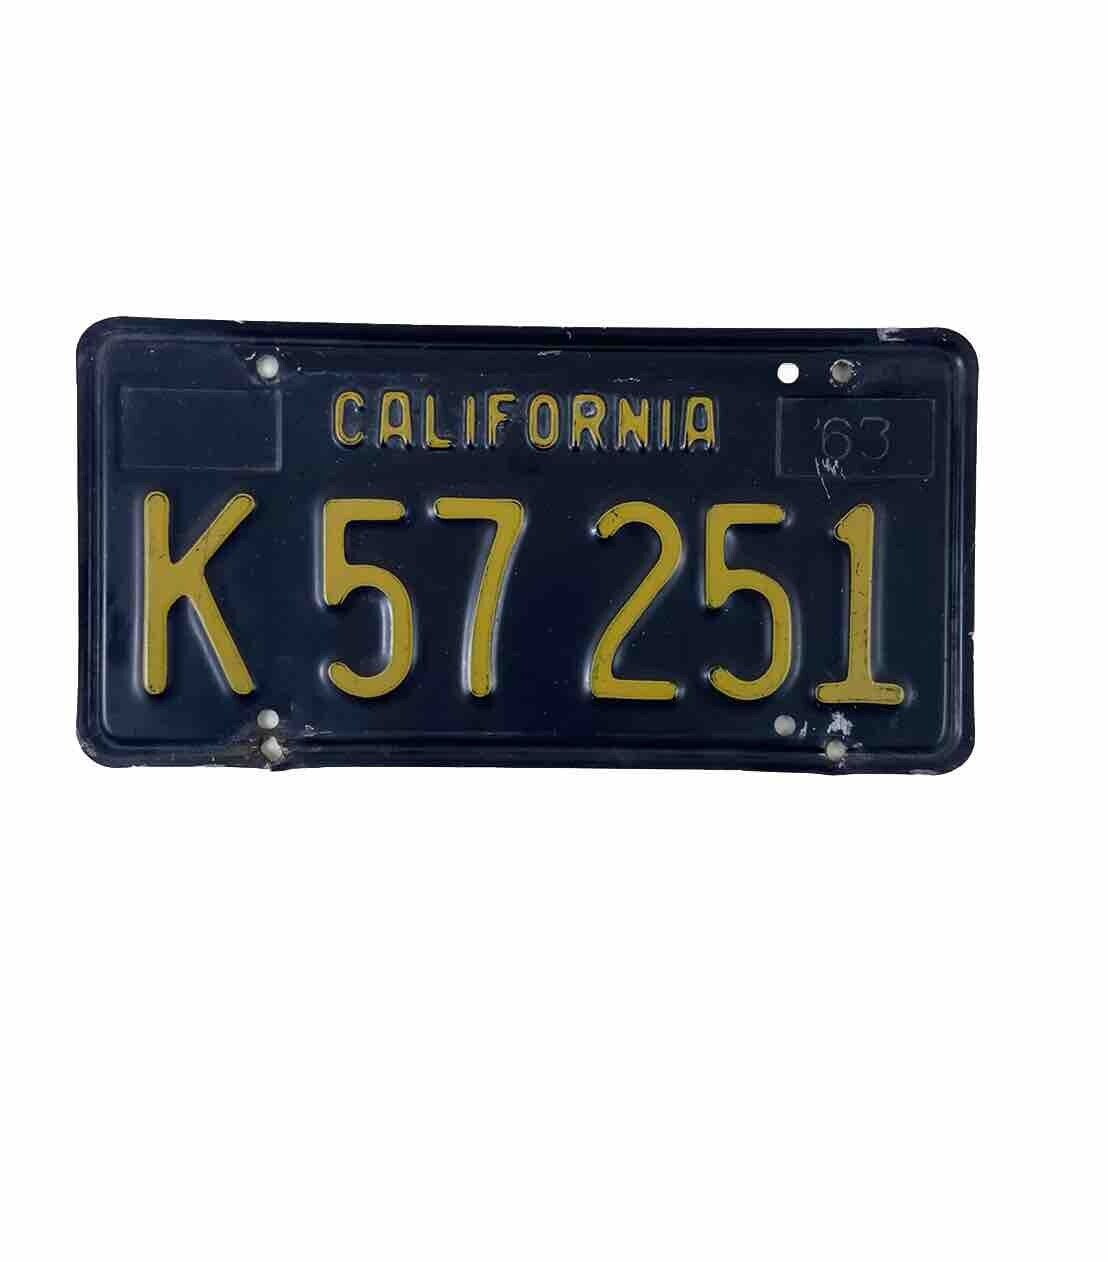 Vintage Authentic 1963 California Commercial License Plate Black & Yellow 12”x6”